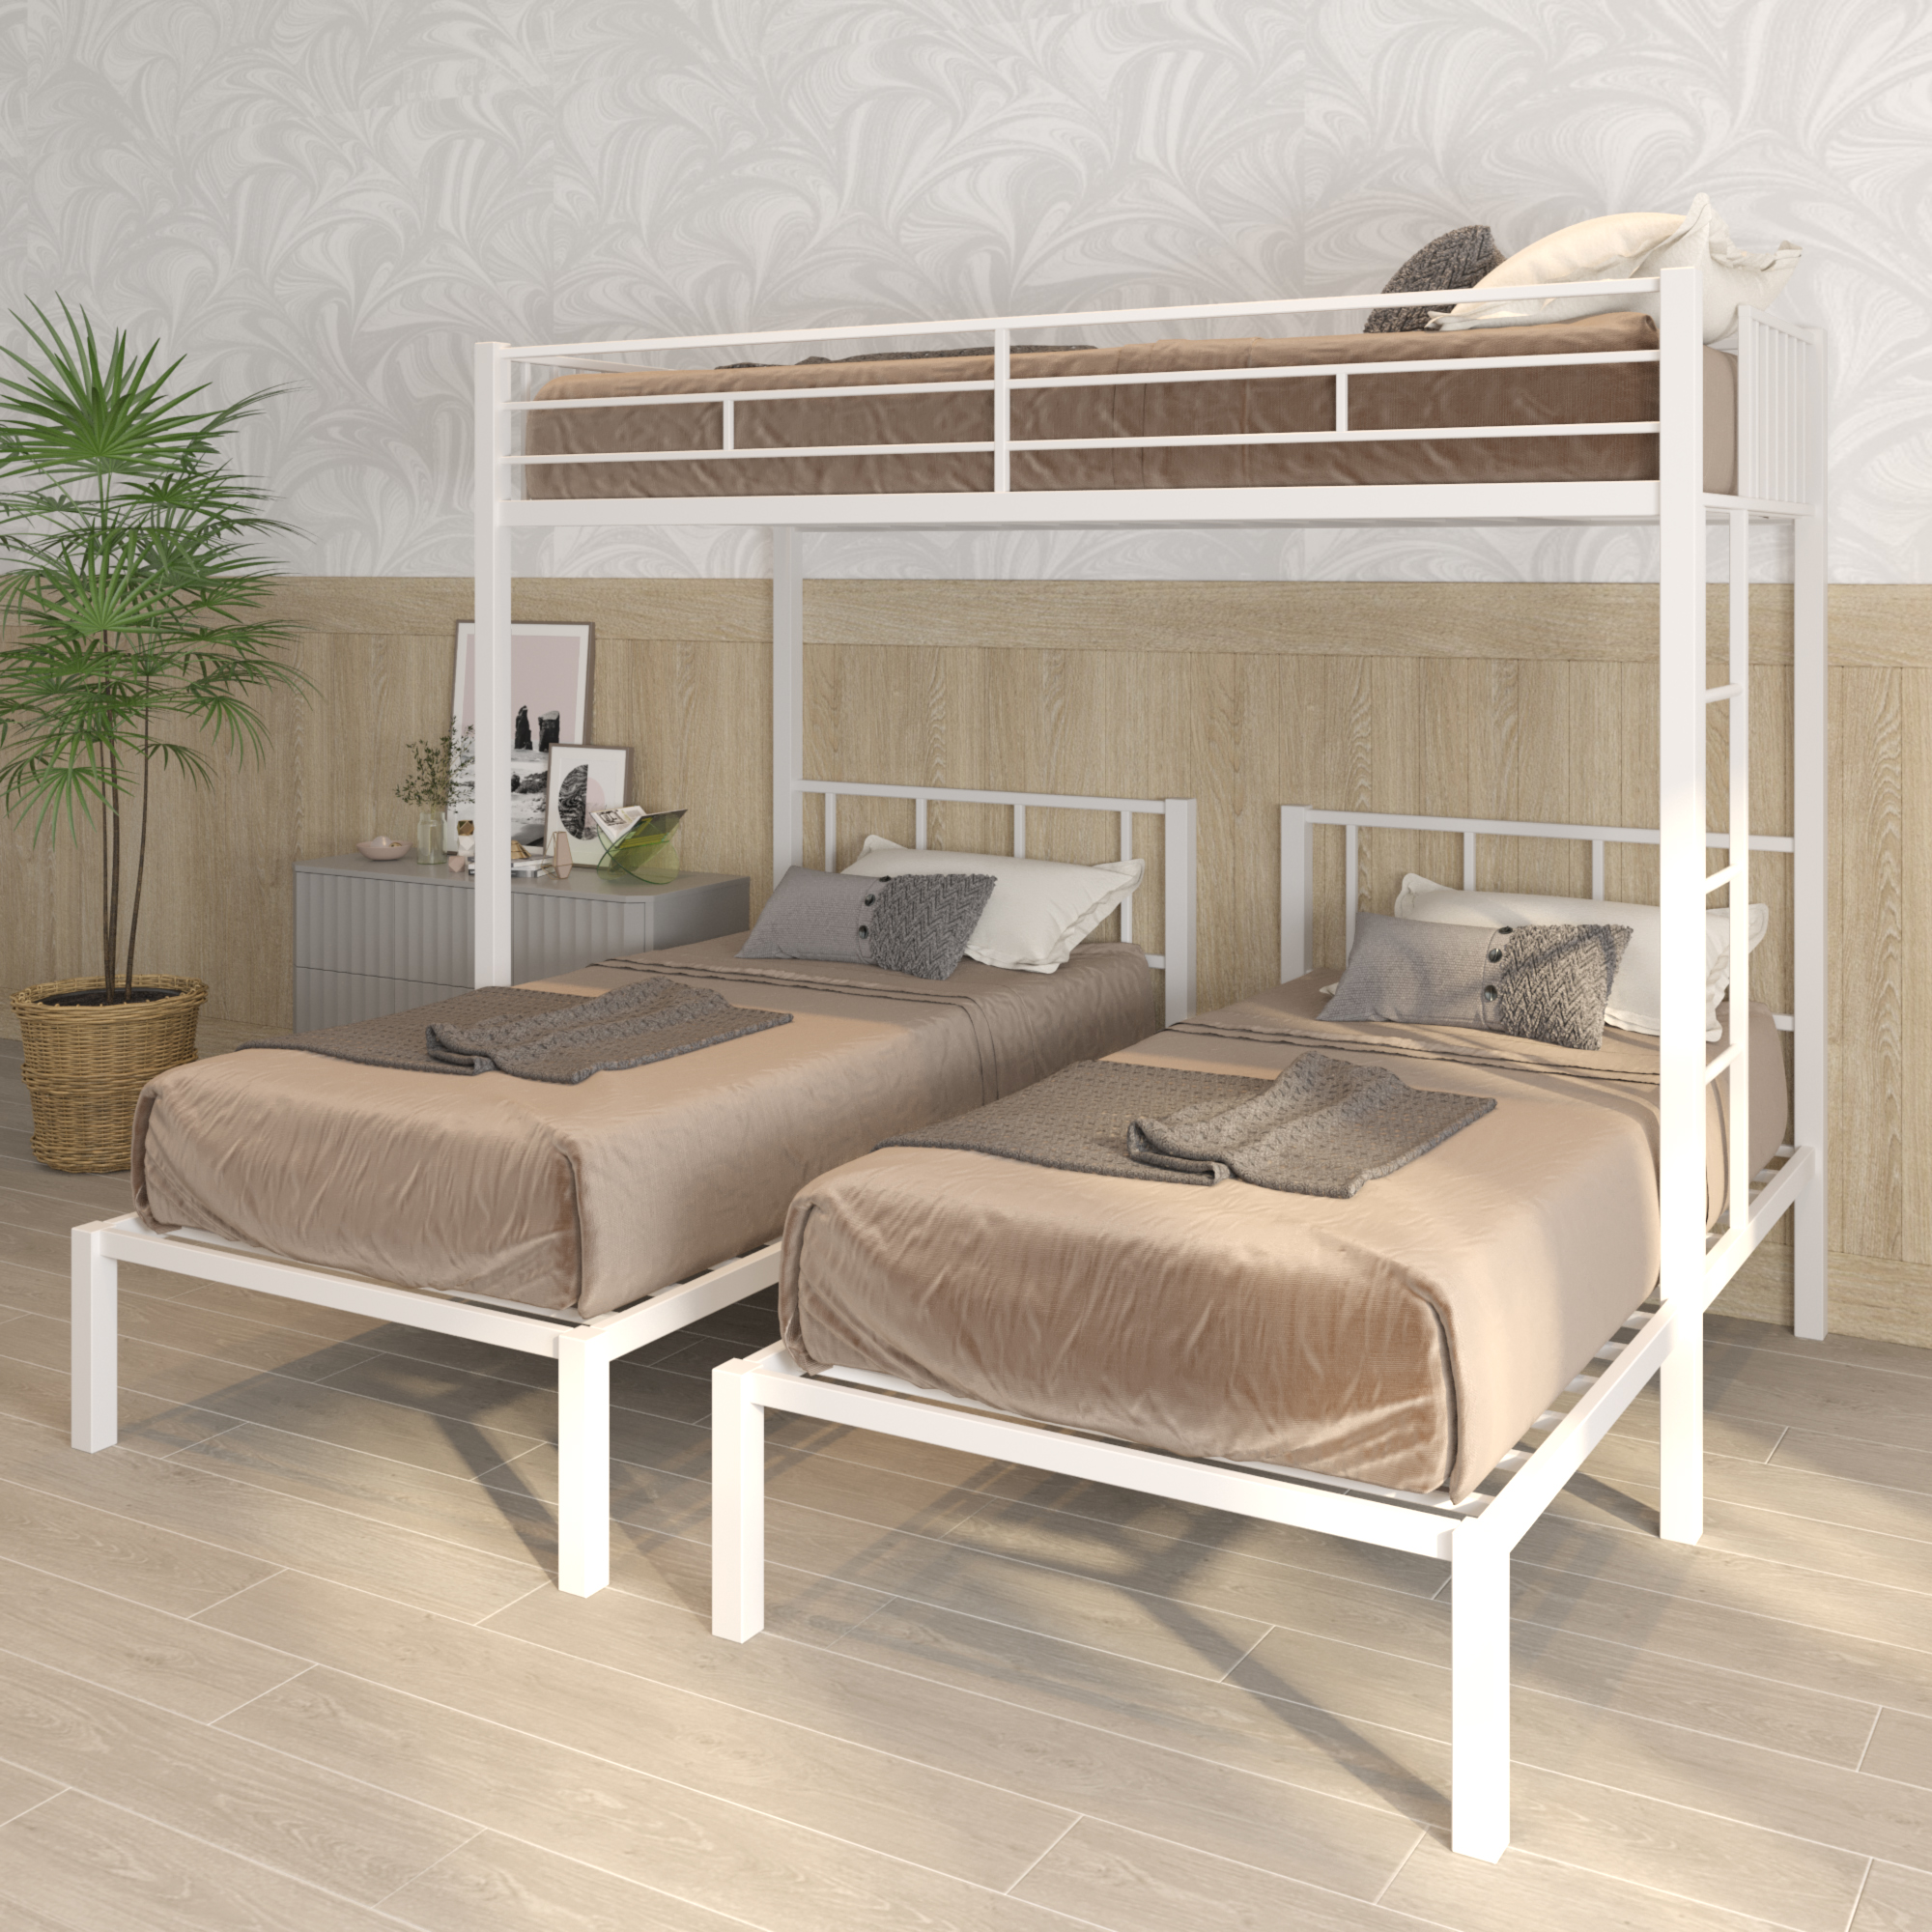 White Triple Twin Bunk Bed, Can Be Separated Into 3 Twin Beds, Suitable for Bedroom Living Room Dorm, 91.73"L x 77.95"W x 72.05"H, for Kids Adults Teens【2022 New】 - image 1 of 9